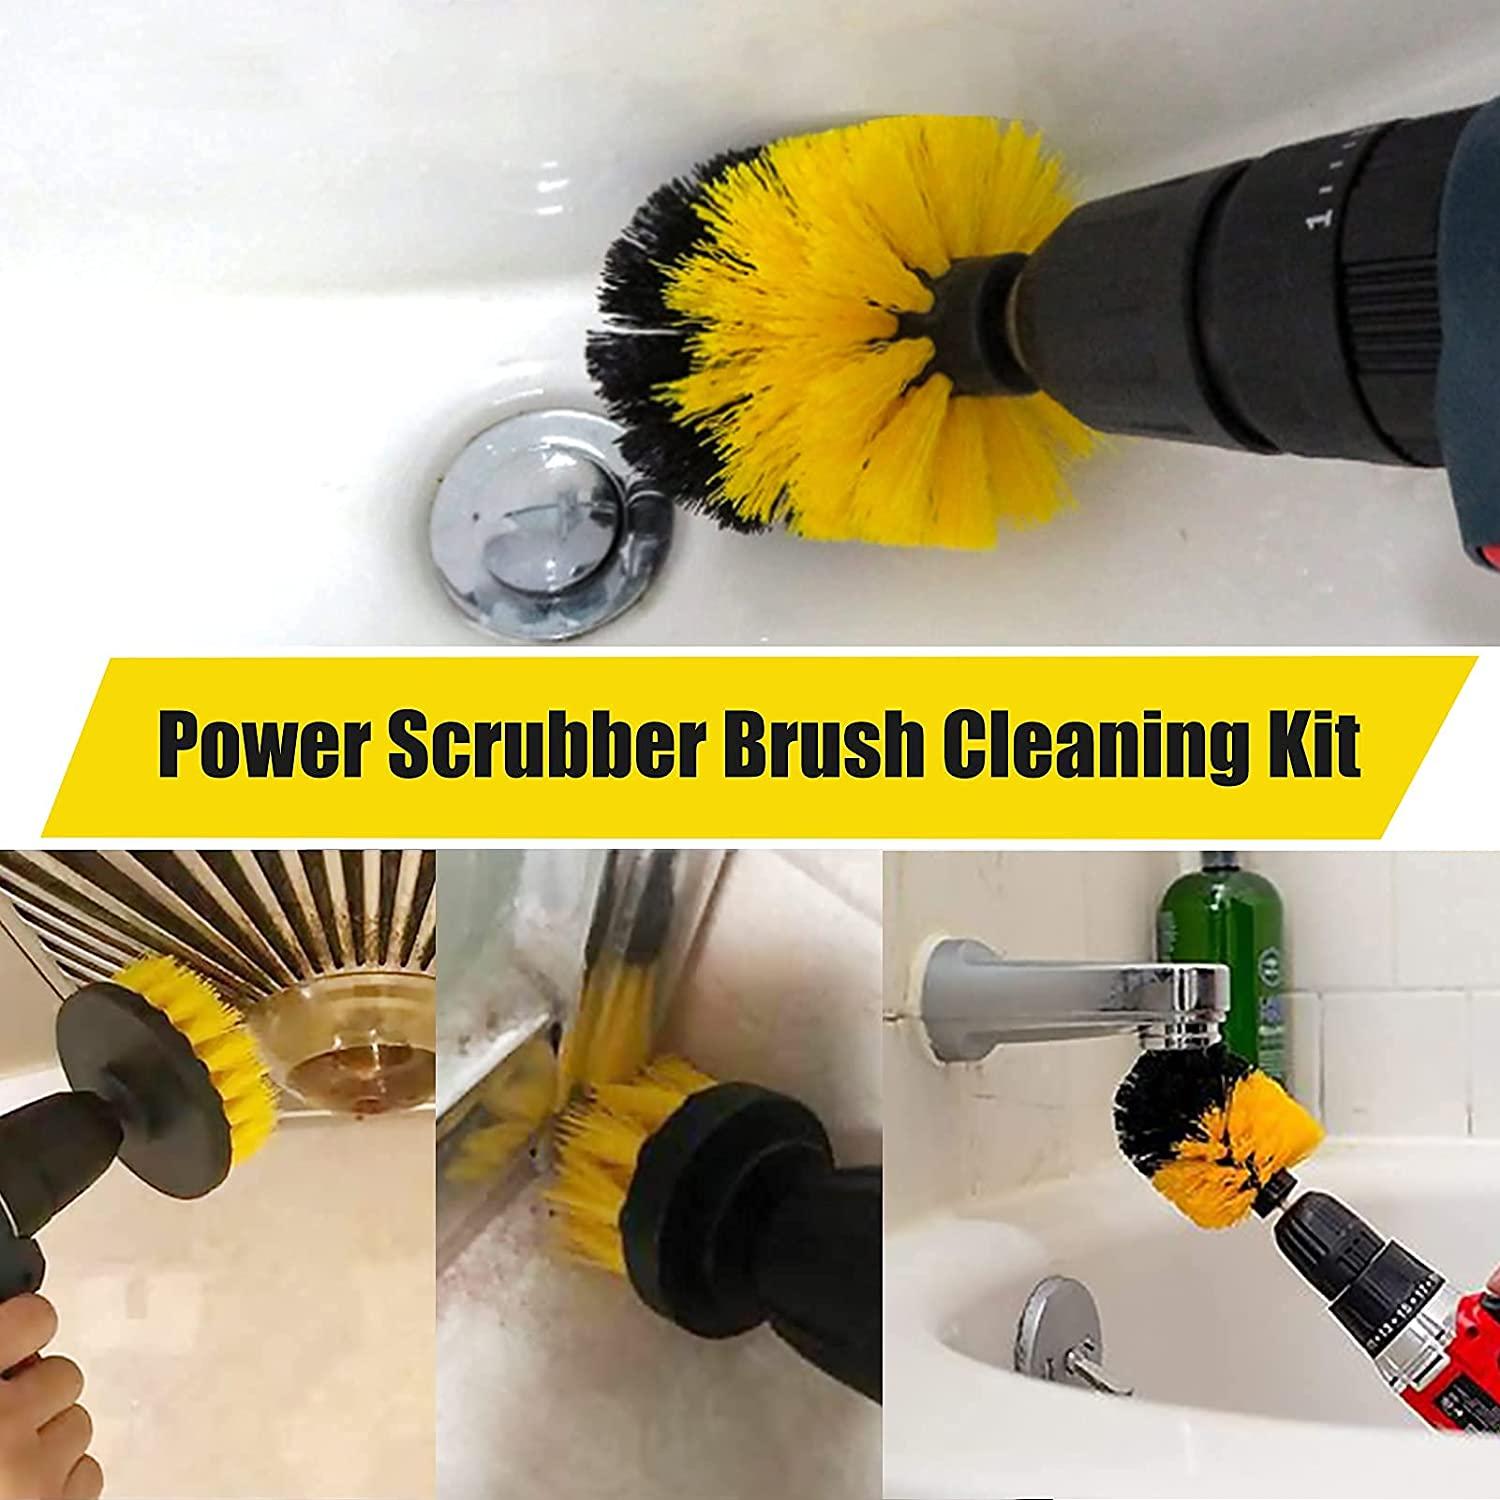 Set 3 Pack Drill Brush Power Scrubber Cleaning Brush Attachment